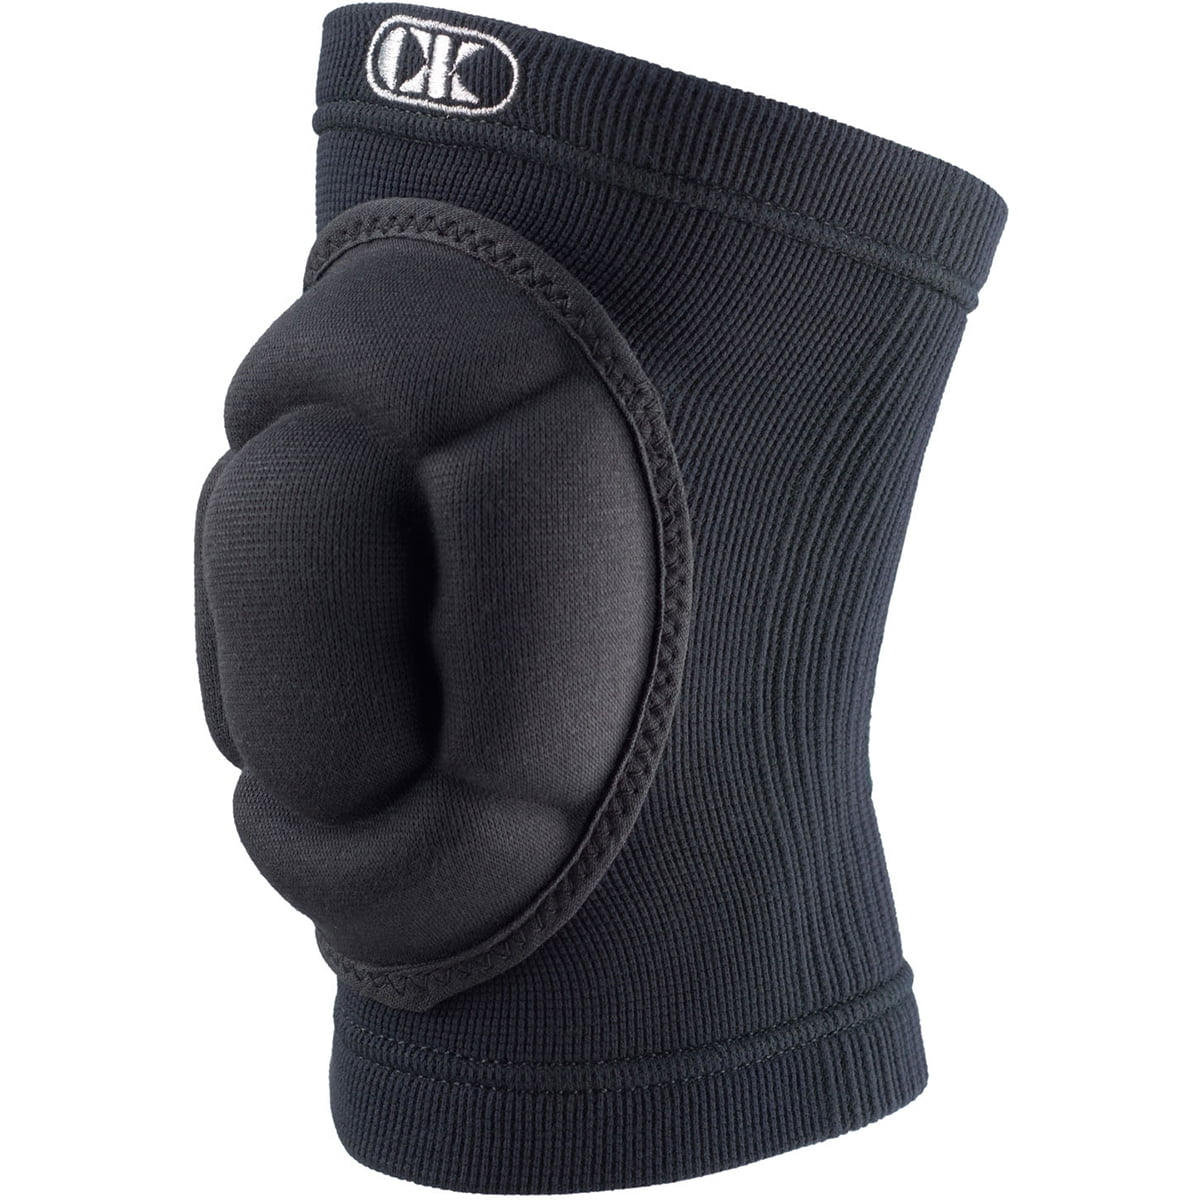 McDavid 645 Standard Knee and Elbow Pad Black Large Compression Sleeves Pair for sale online 